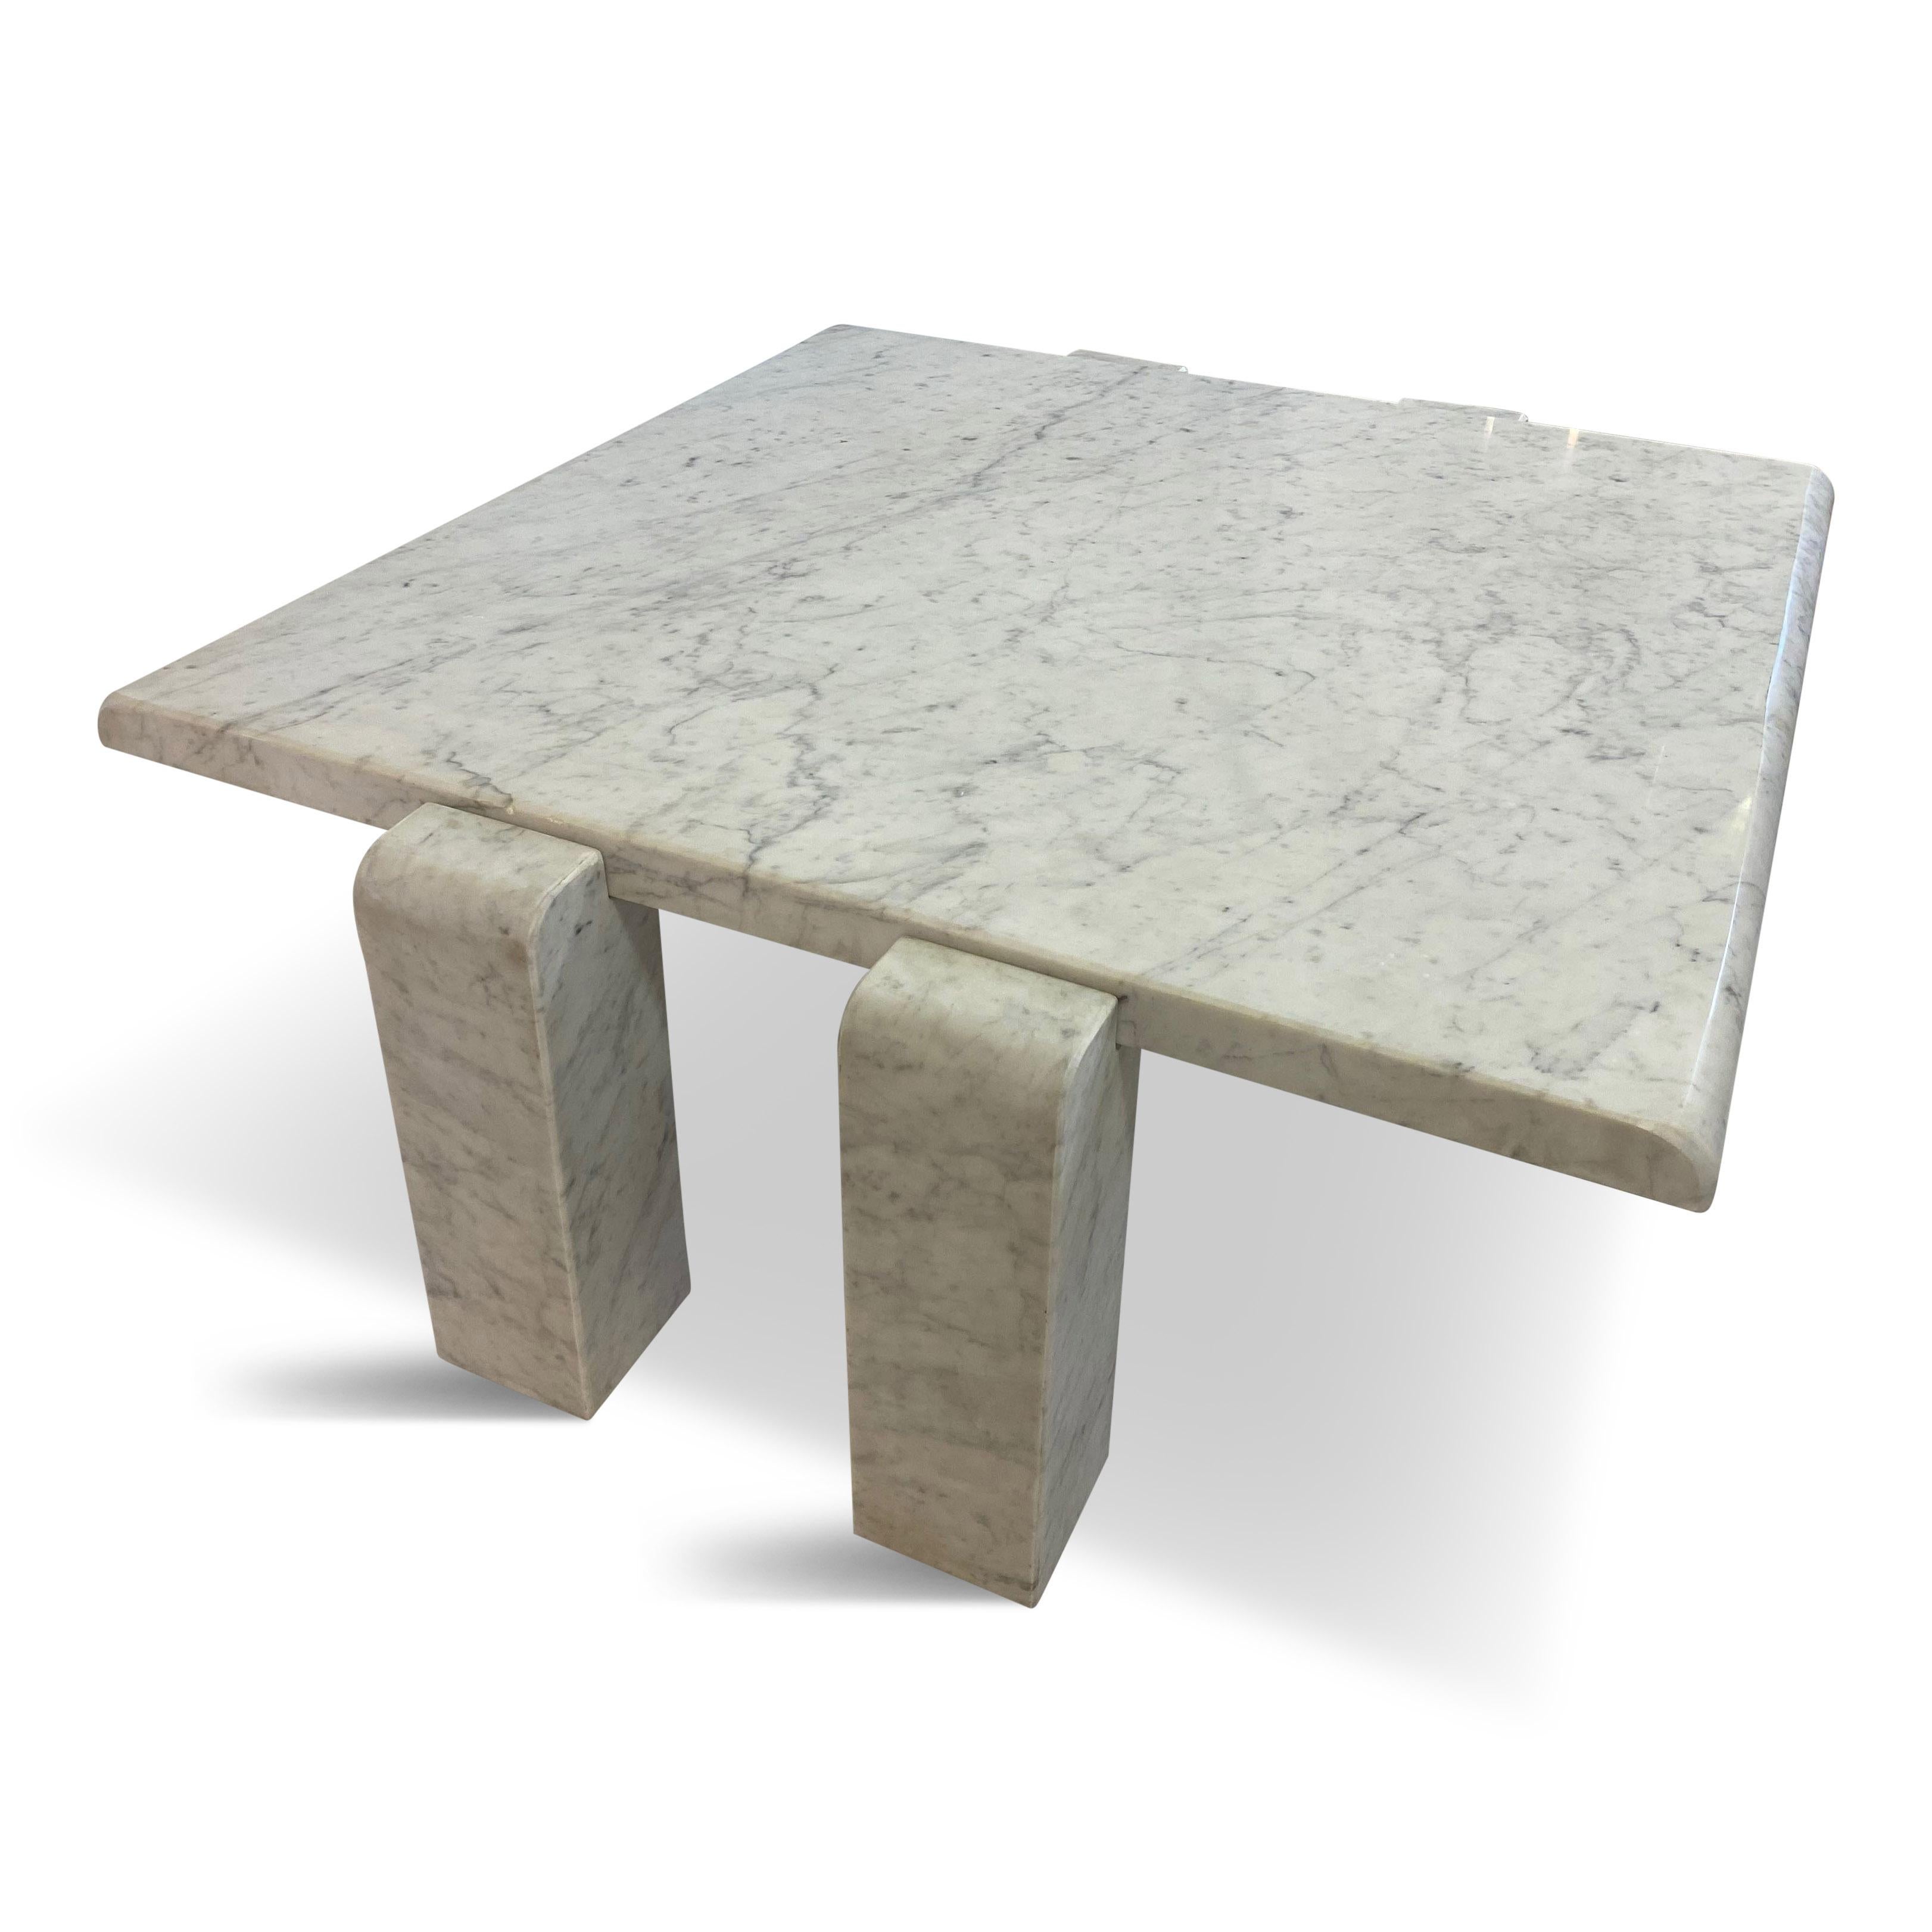 1970s White Italian Coffee Table in Carrara Marble by Skipper For Sale 1